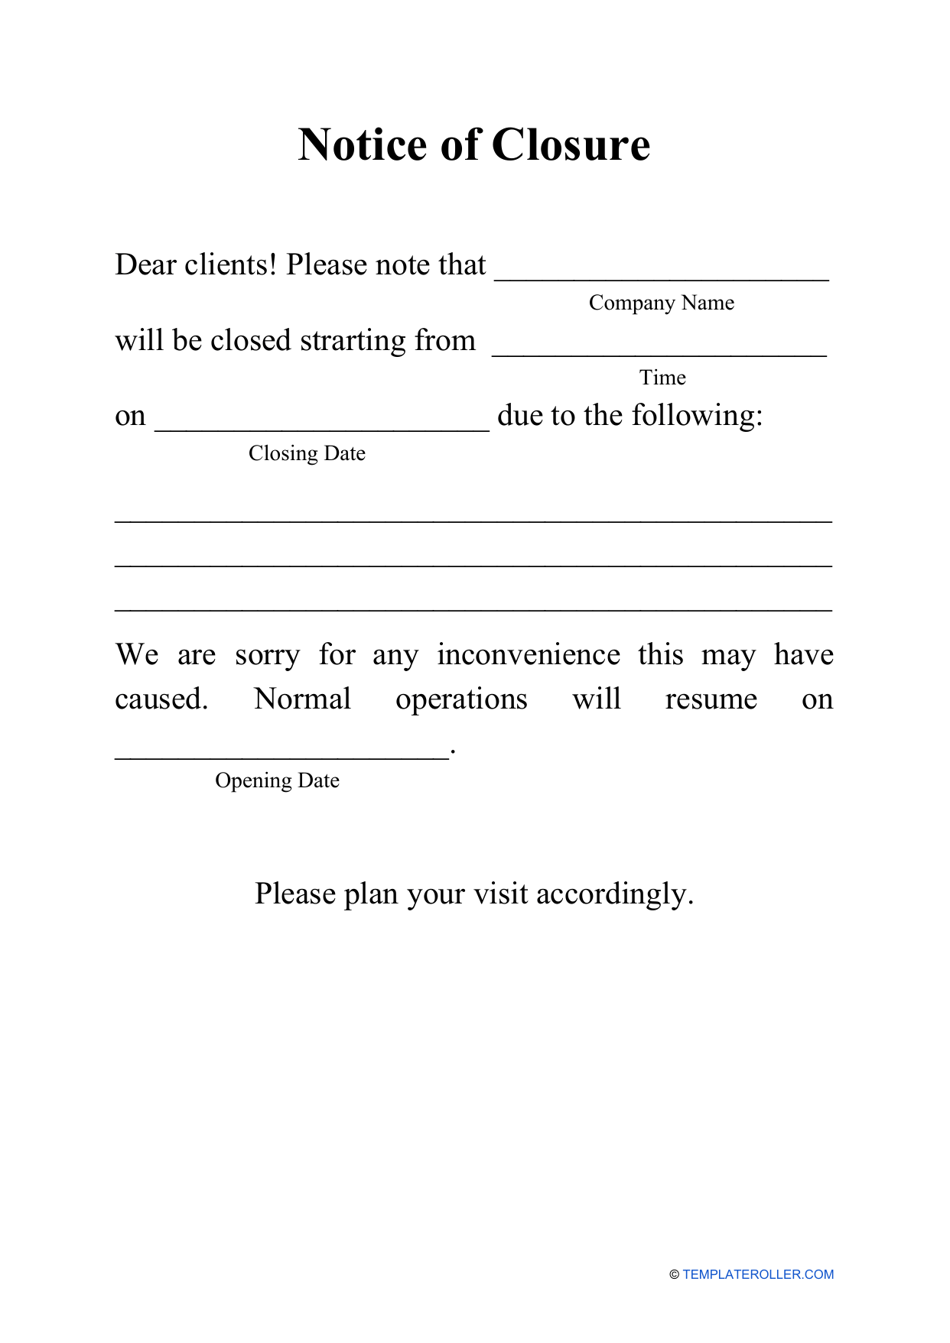 Notice of Closure Template, Page 1